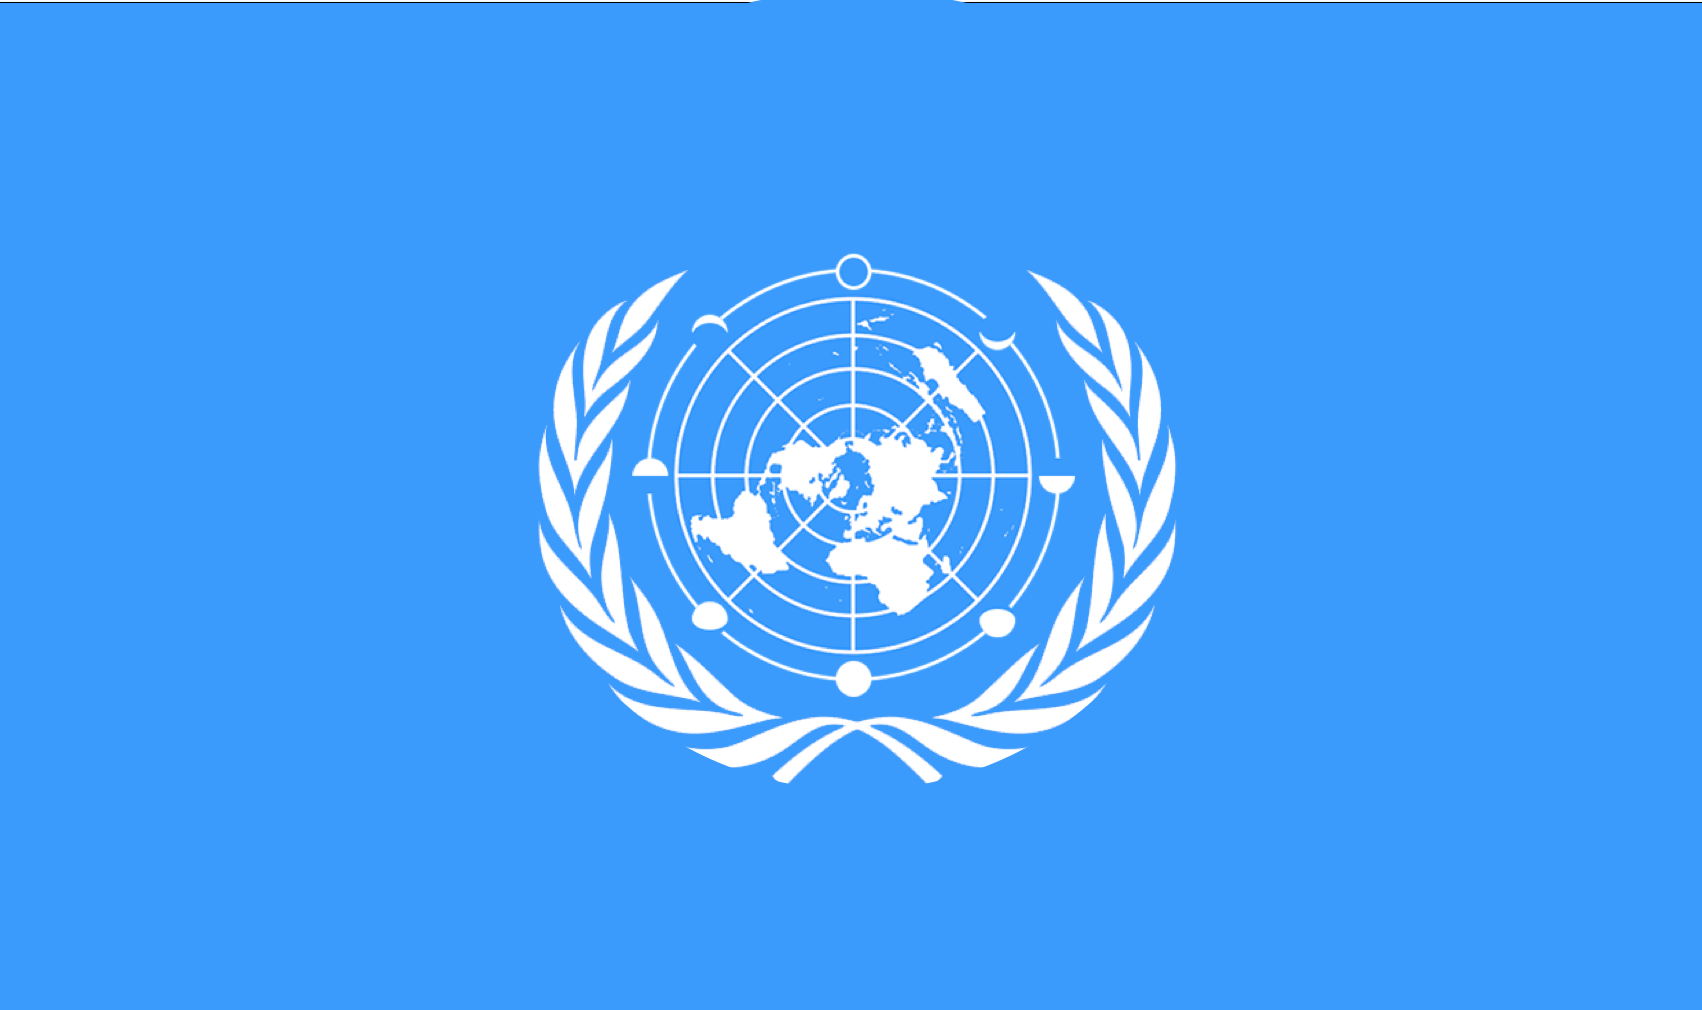 Un Flag Logo - Made IMHO a better UN flag Without the words United Nations on it